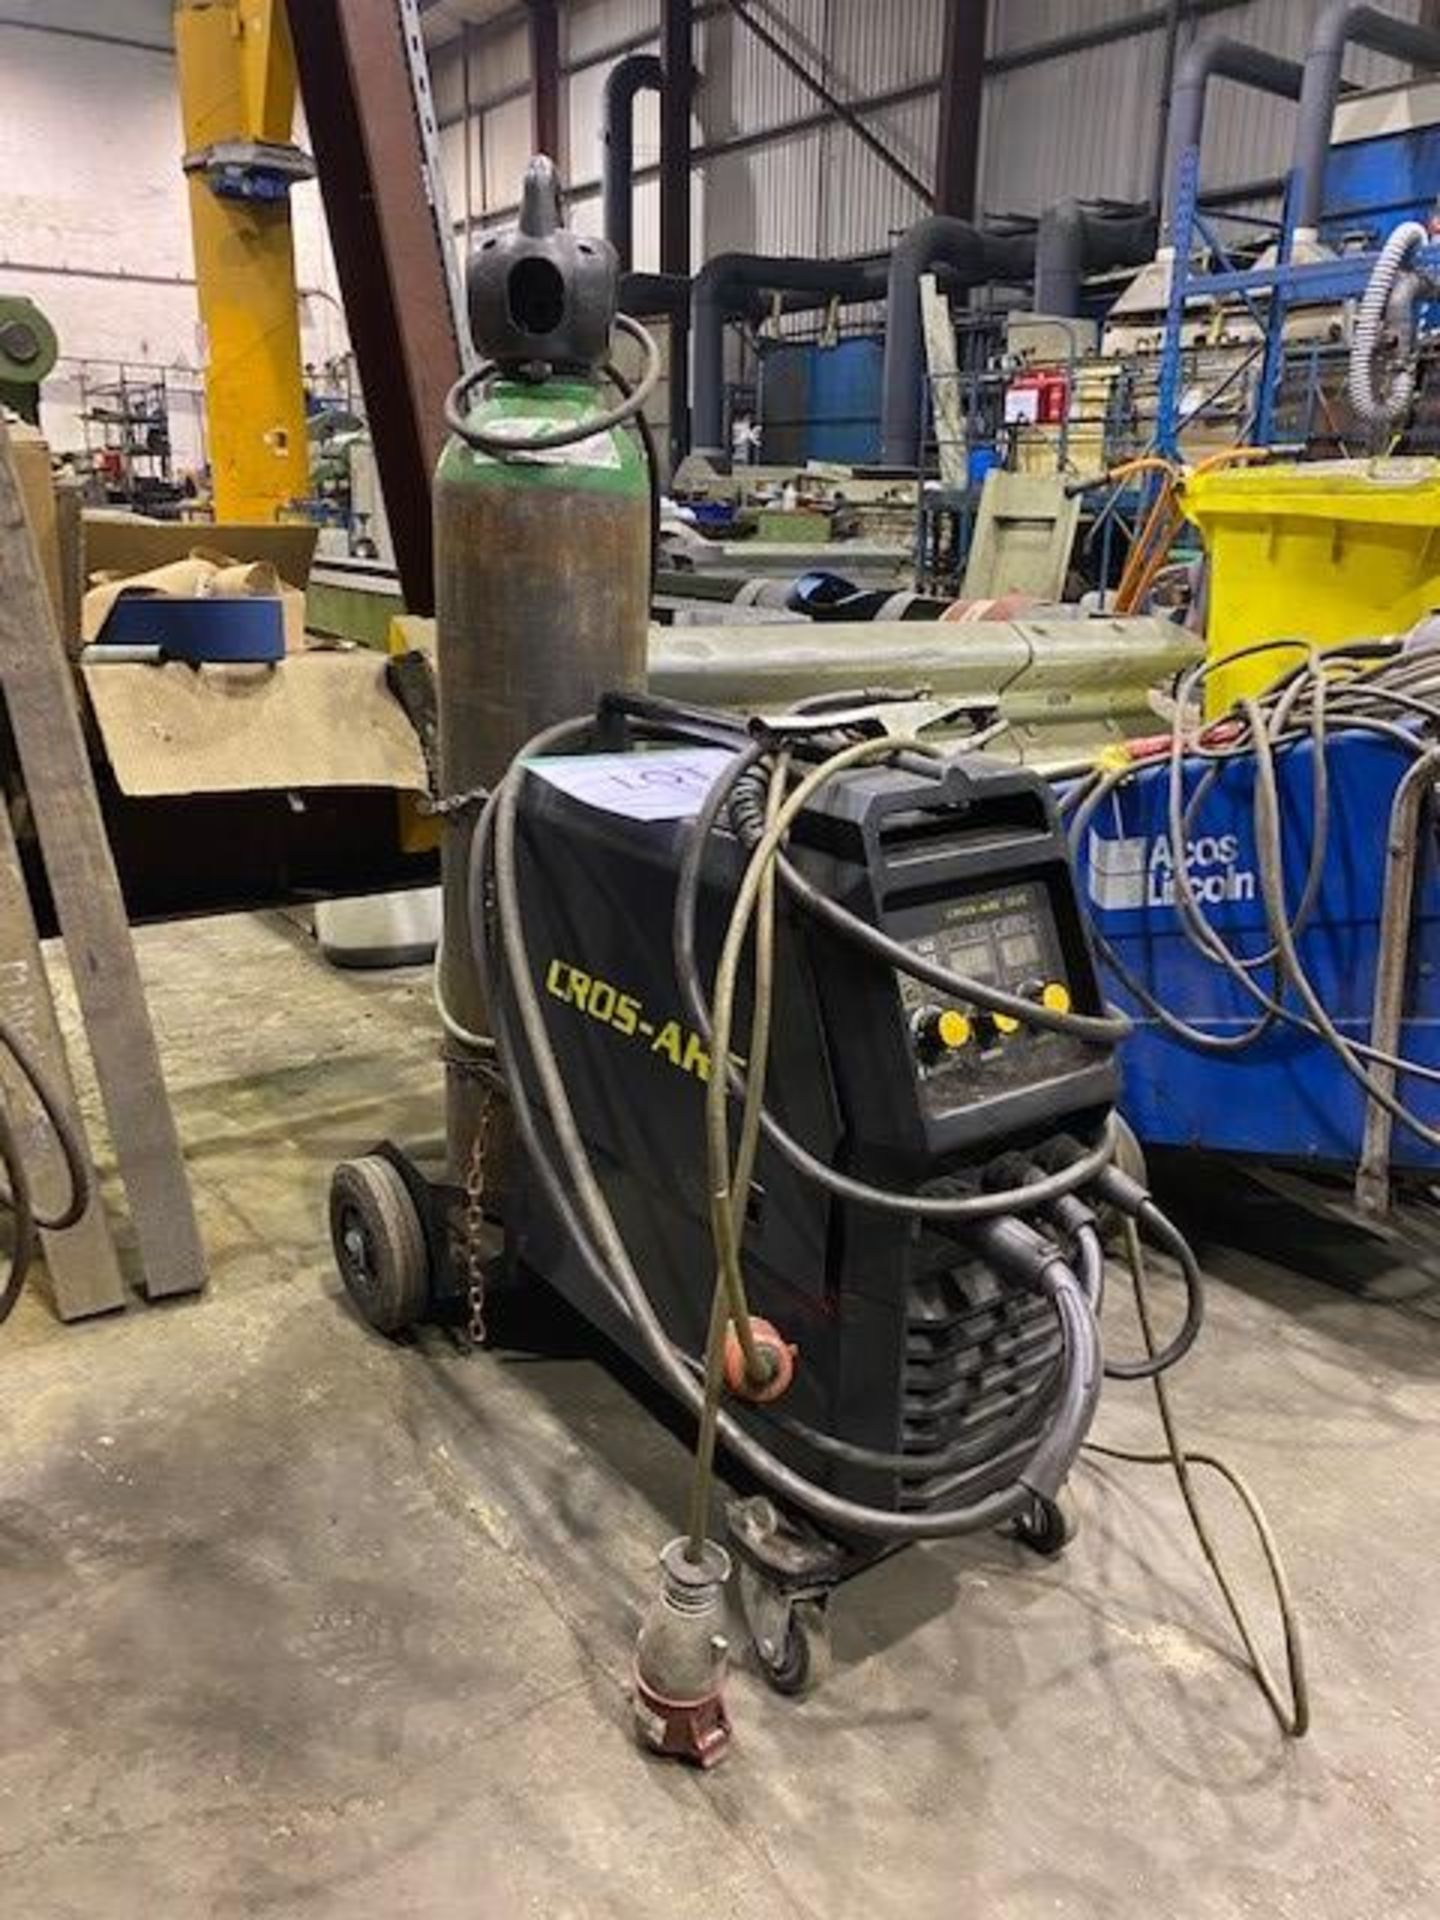 CROS-ARC 323C INVERTER MIG WELDER 415V 3PHASE INPUT FORCED AIR COOLING WITH THERMAL OVERLOAD - Image 2 of 2